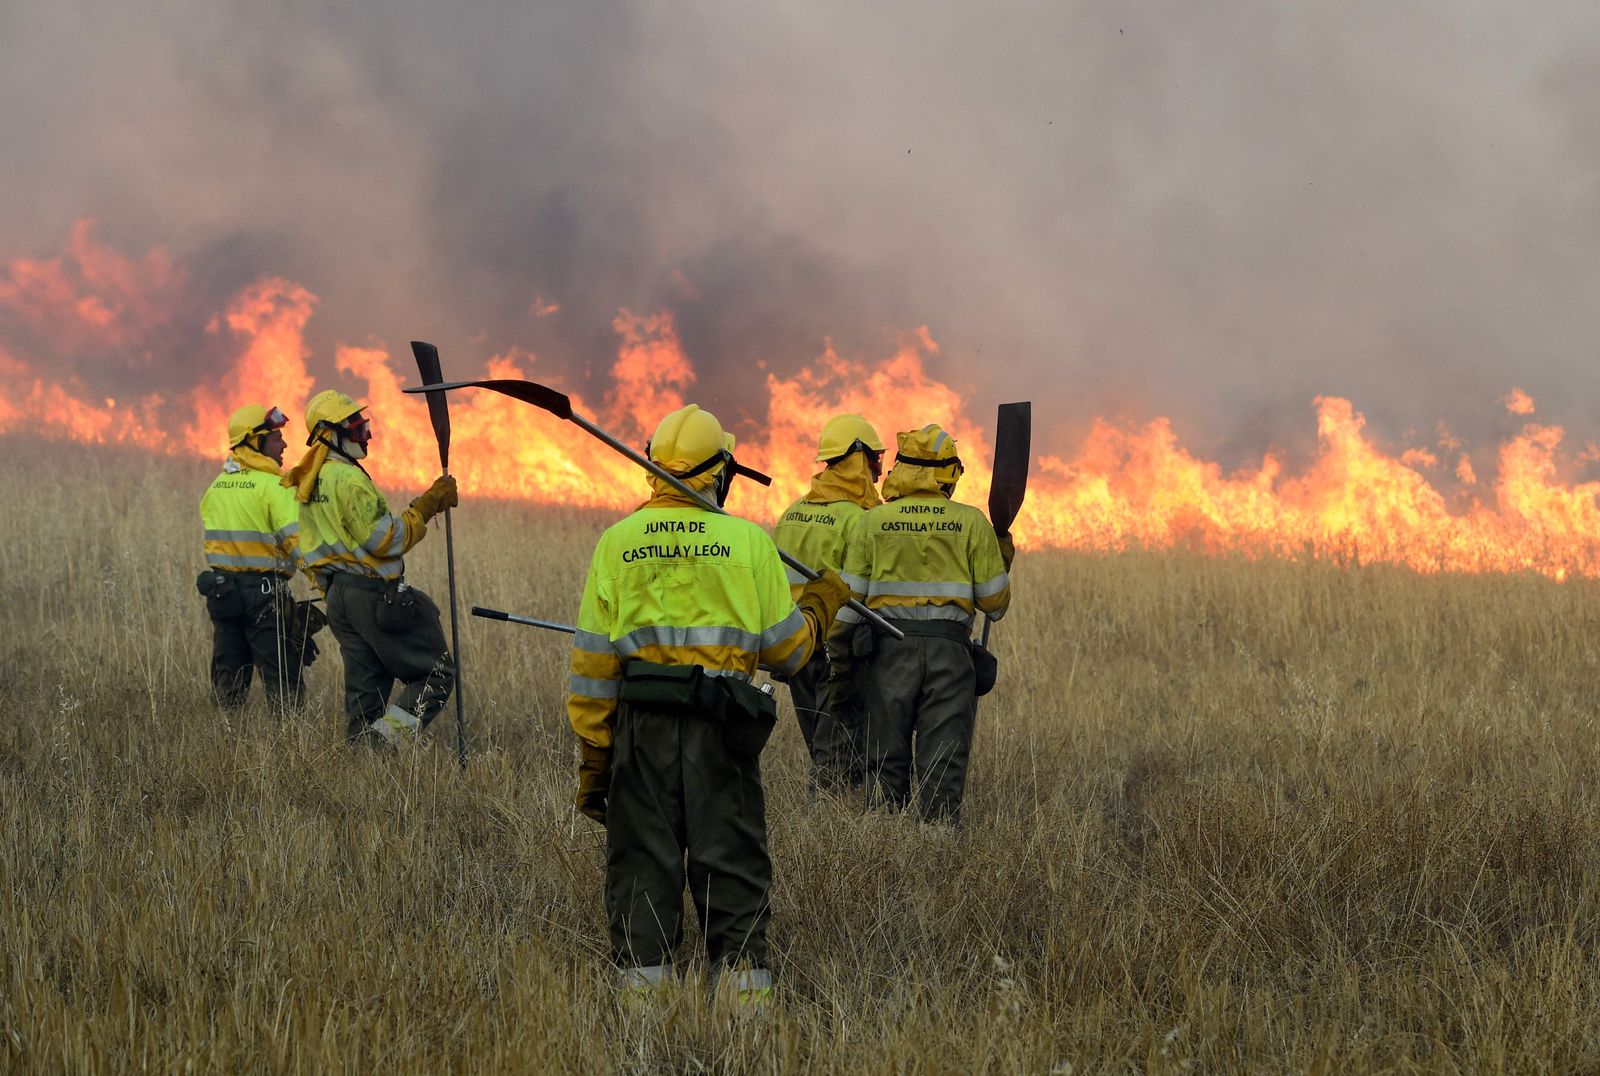 Firefighters stand guard as they look at fire in the village of Tabara, near Zamora, northwest Spain, on July 18, 2022. - Emergency services battled several wildfires as Spain remained in the grip of an exceptional heatwave that has seen temperatures reach 43 degrees Celsius (109 degrees Farenheit). (Photo by MIGUEL RIOPA / AFP) - AFP